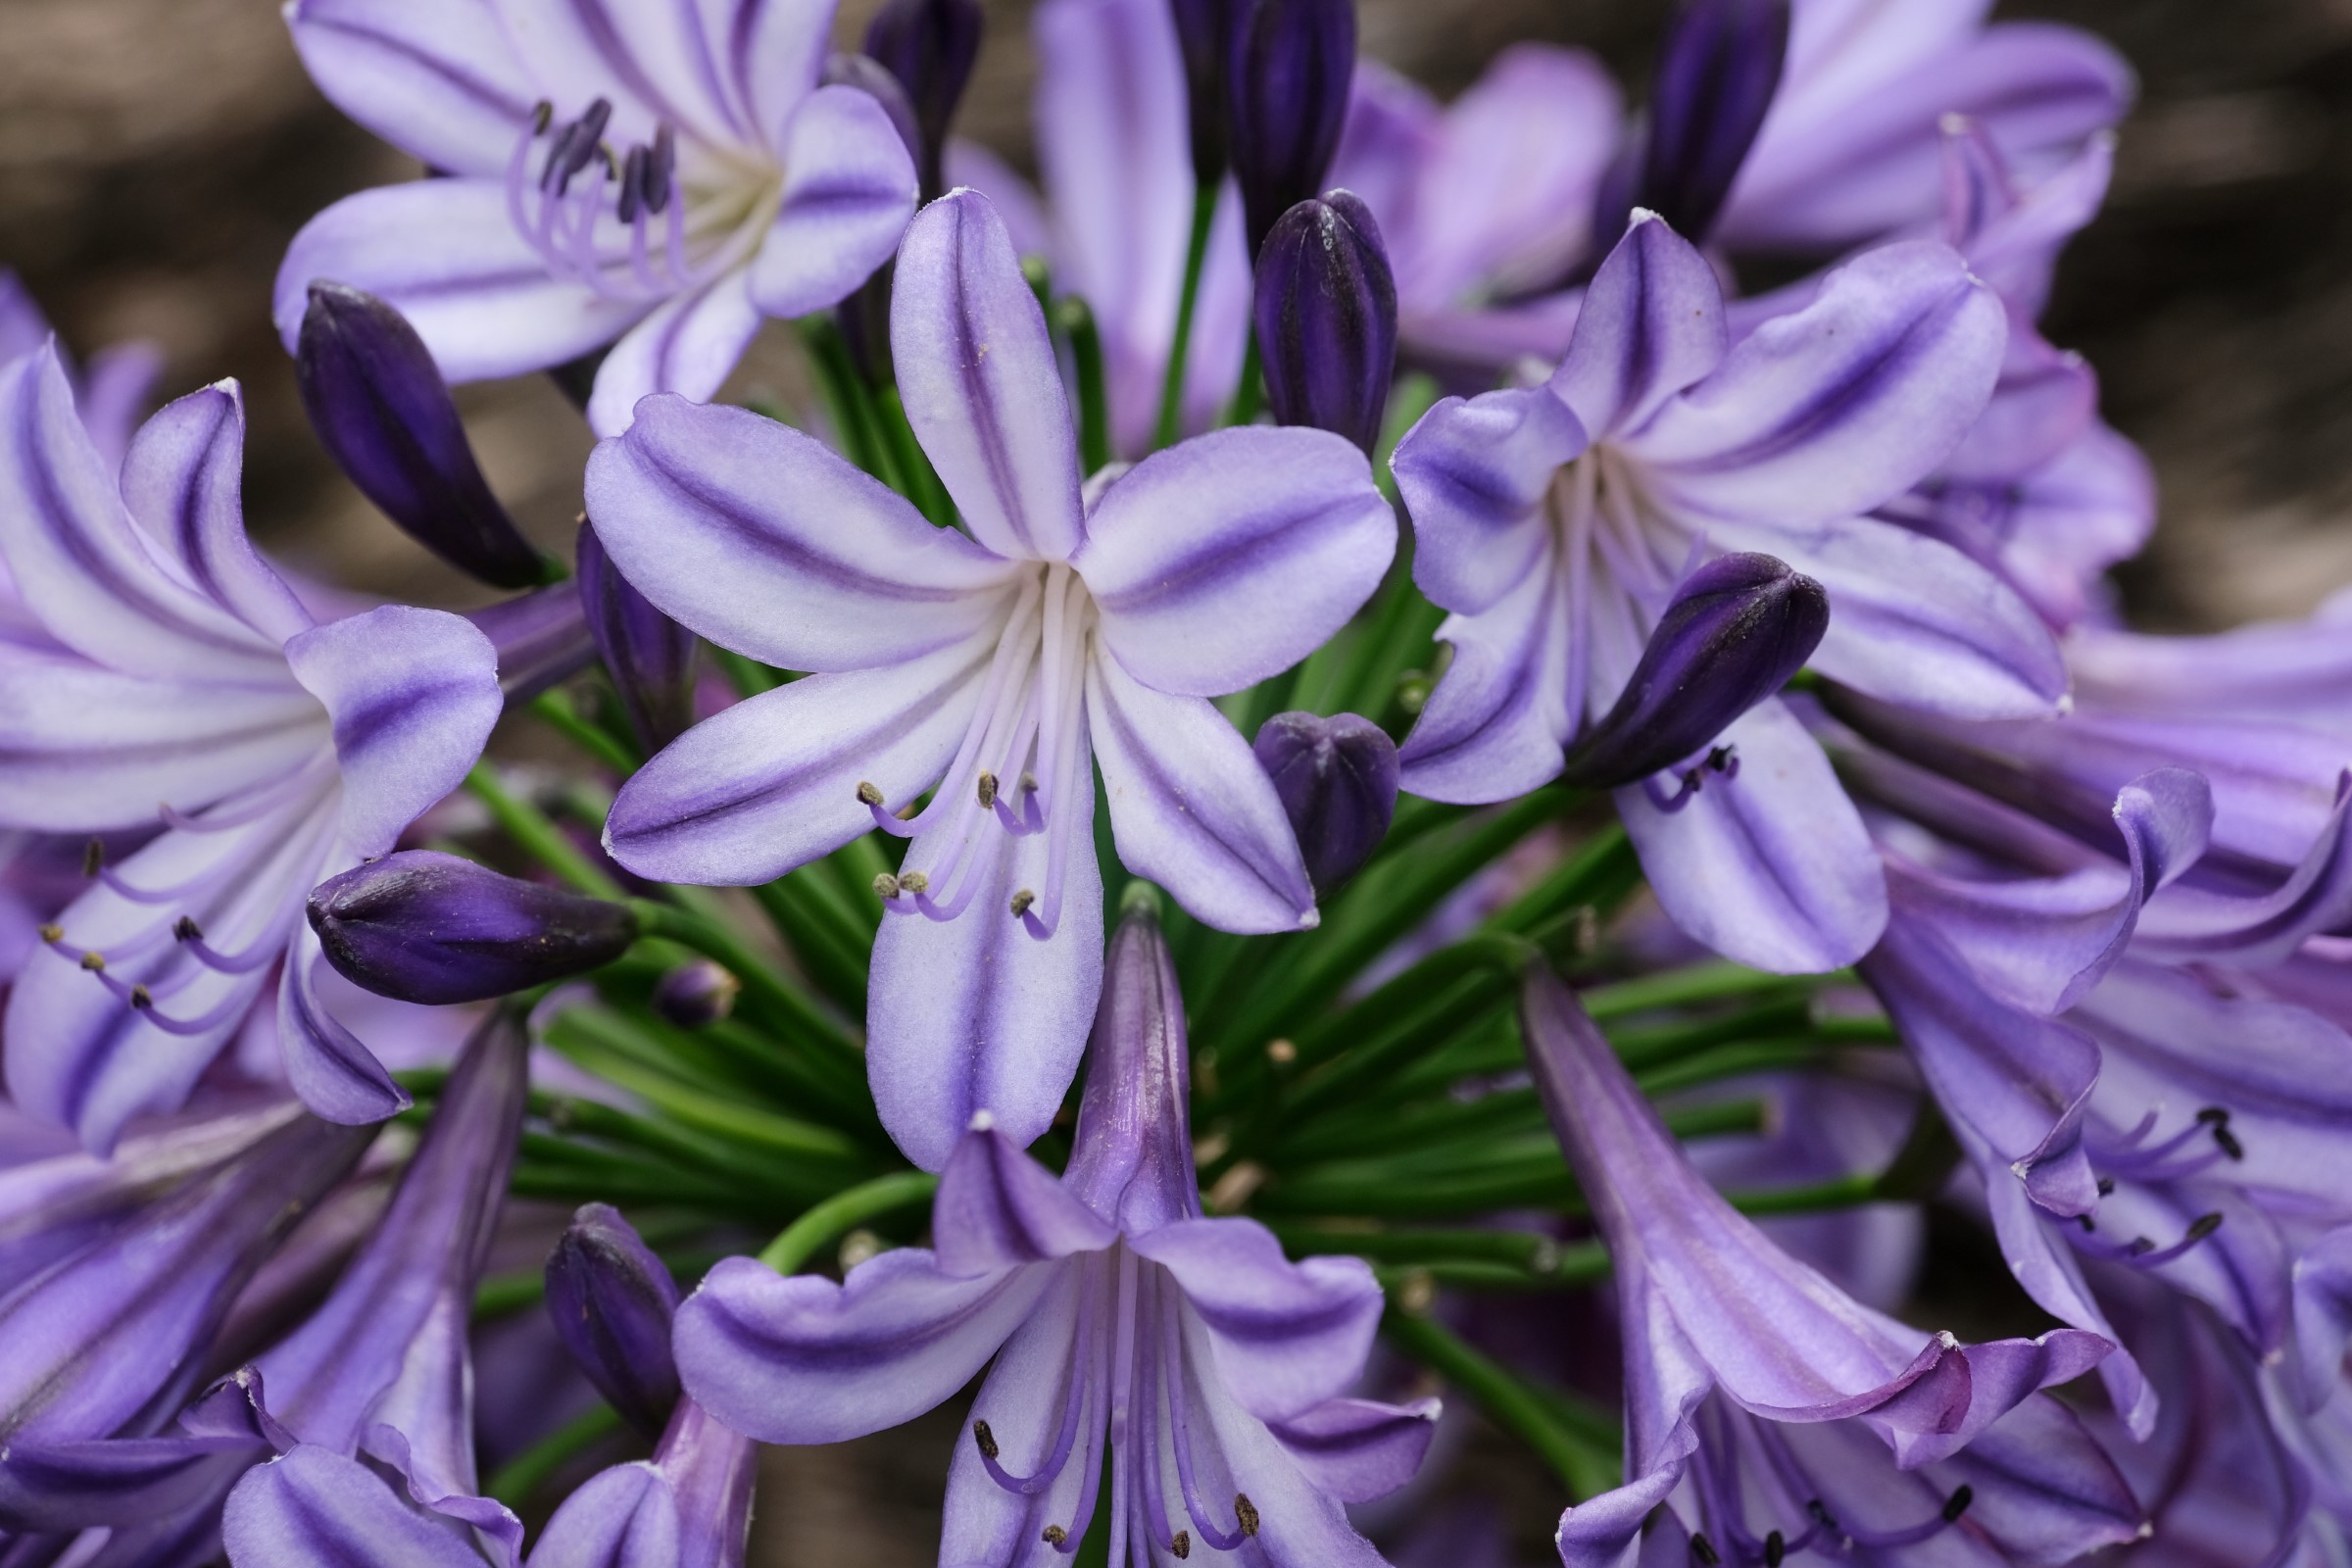 Poppin' Star Lily of the Nile, Agapanthus